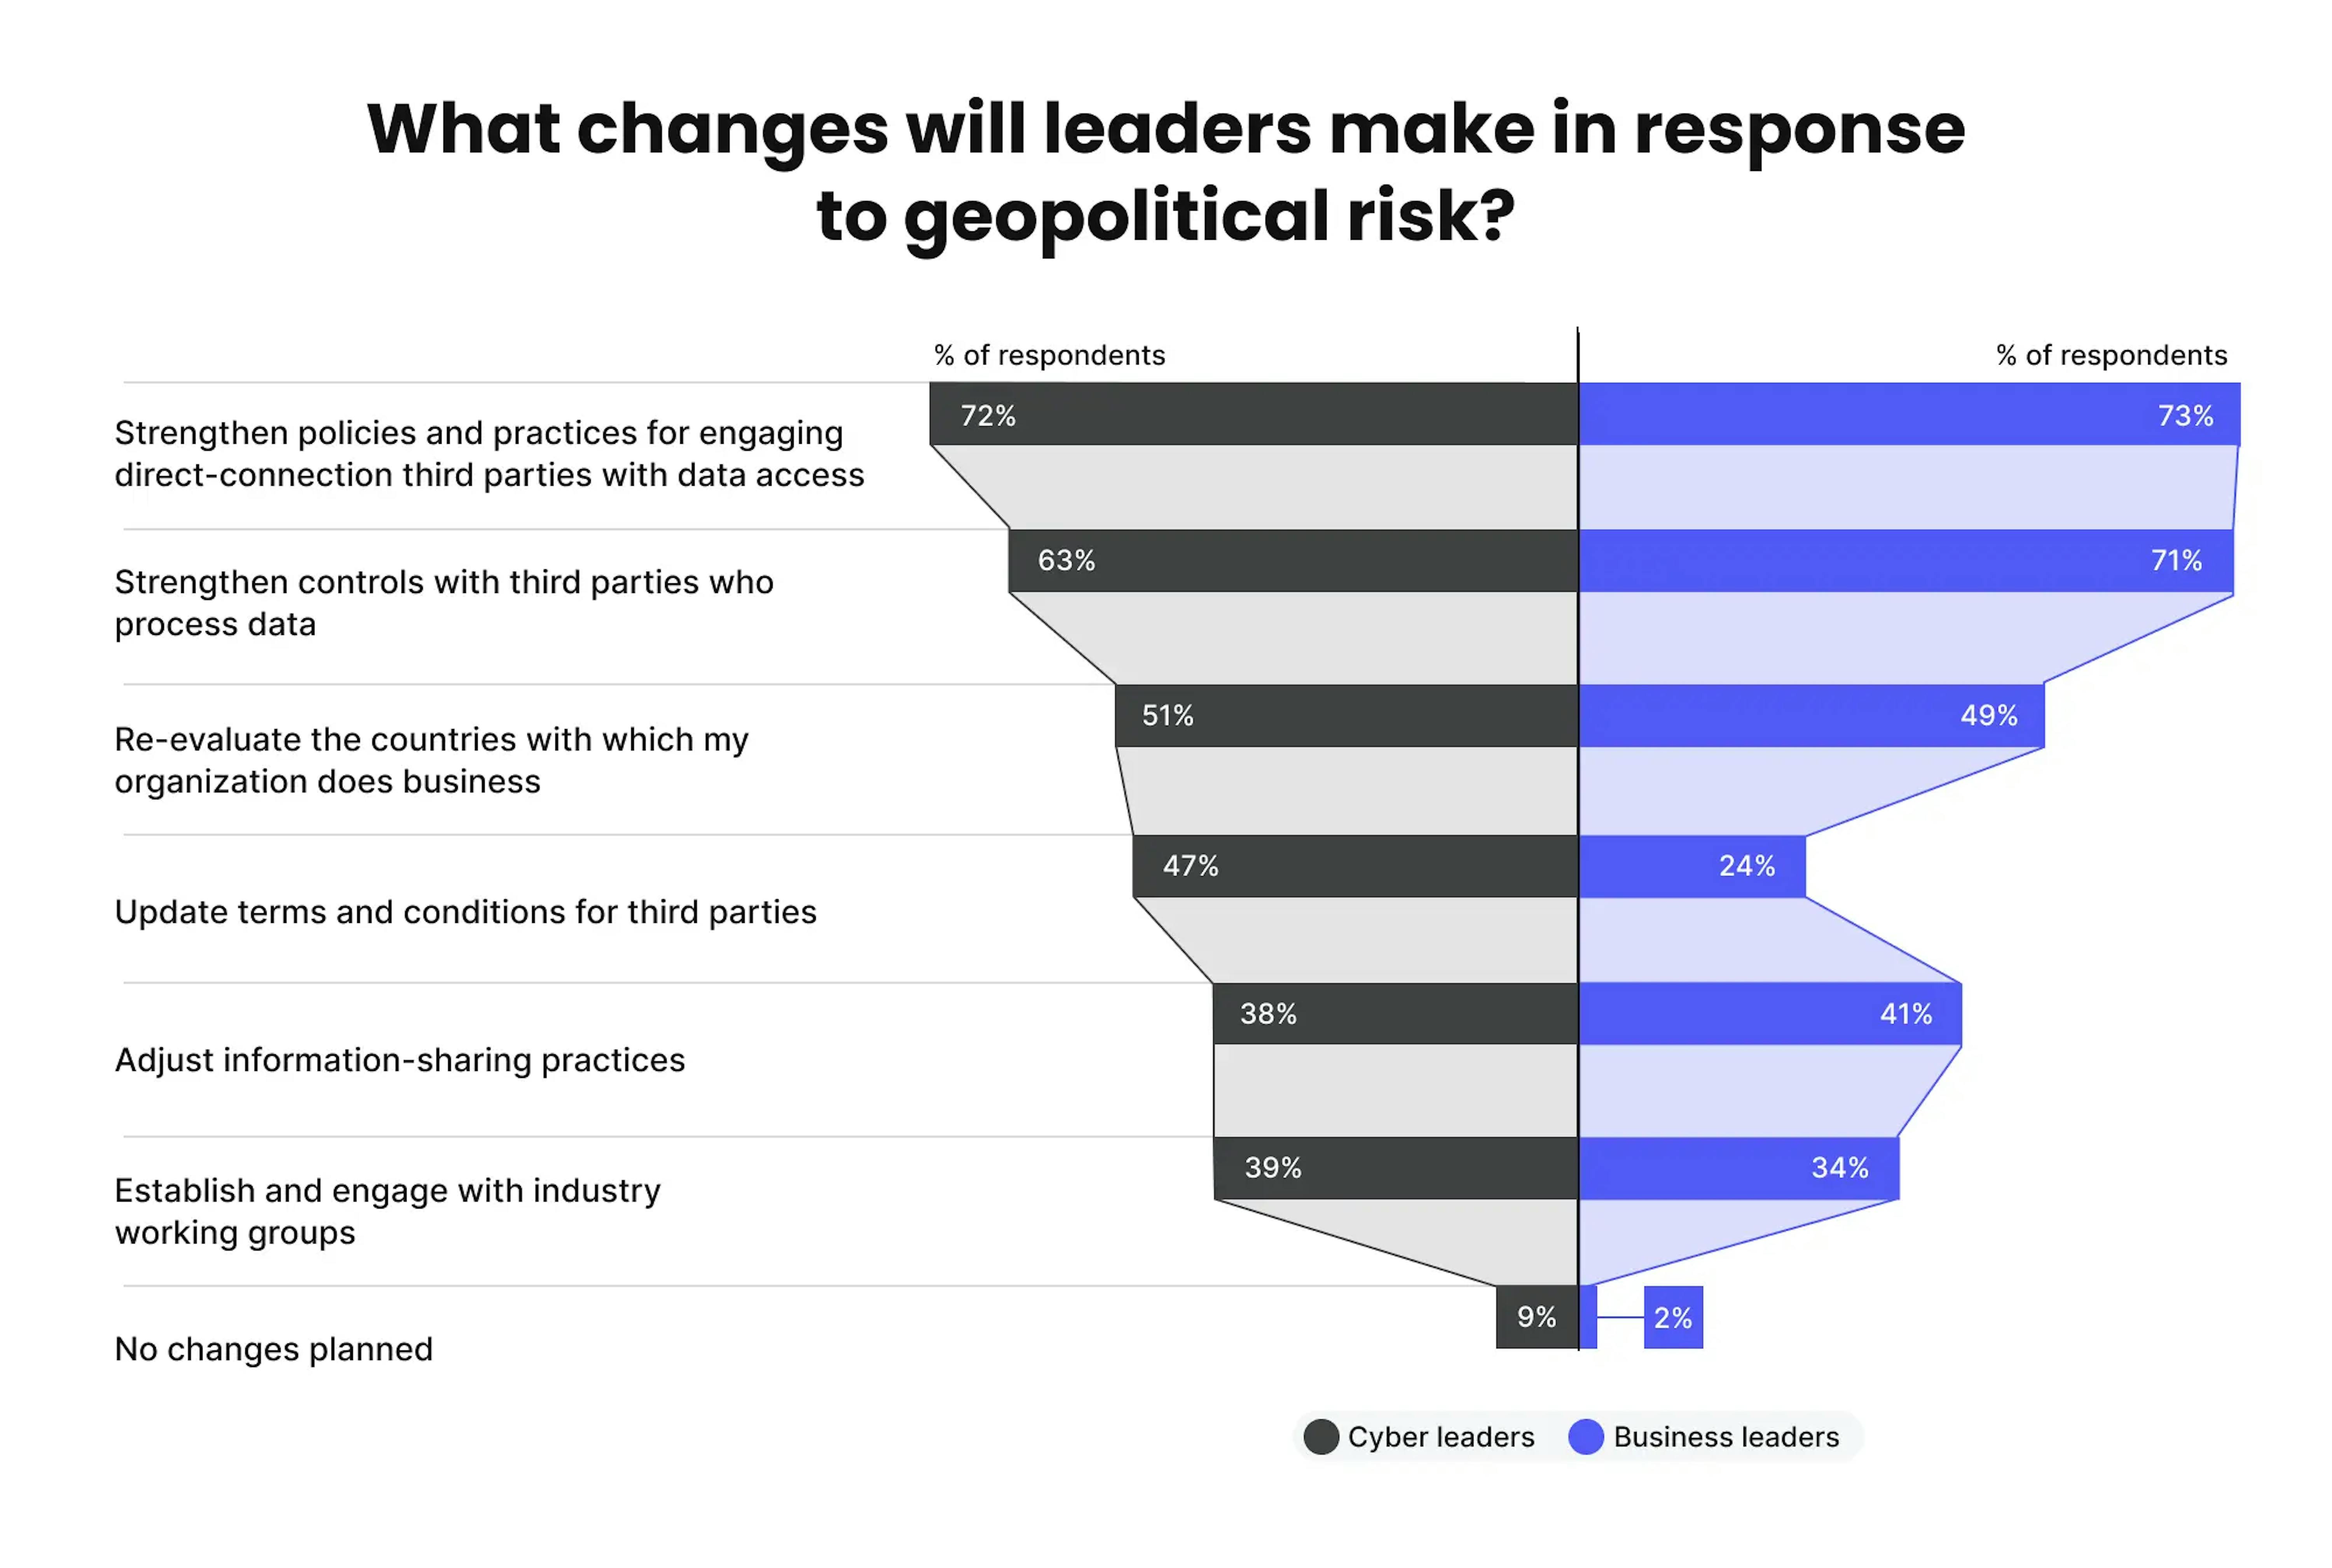 What changes will leaders make in response to geopolitical risk?